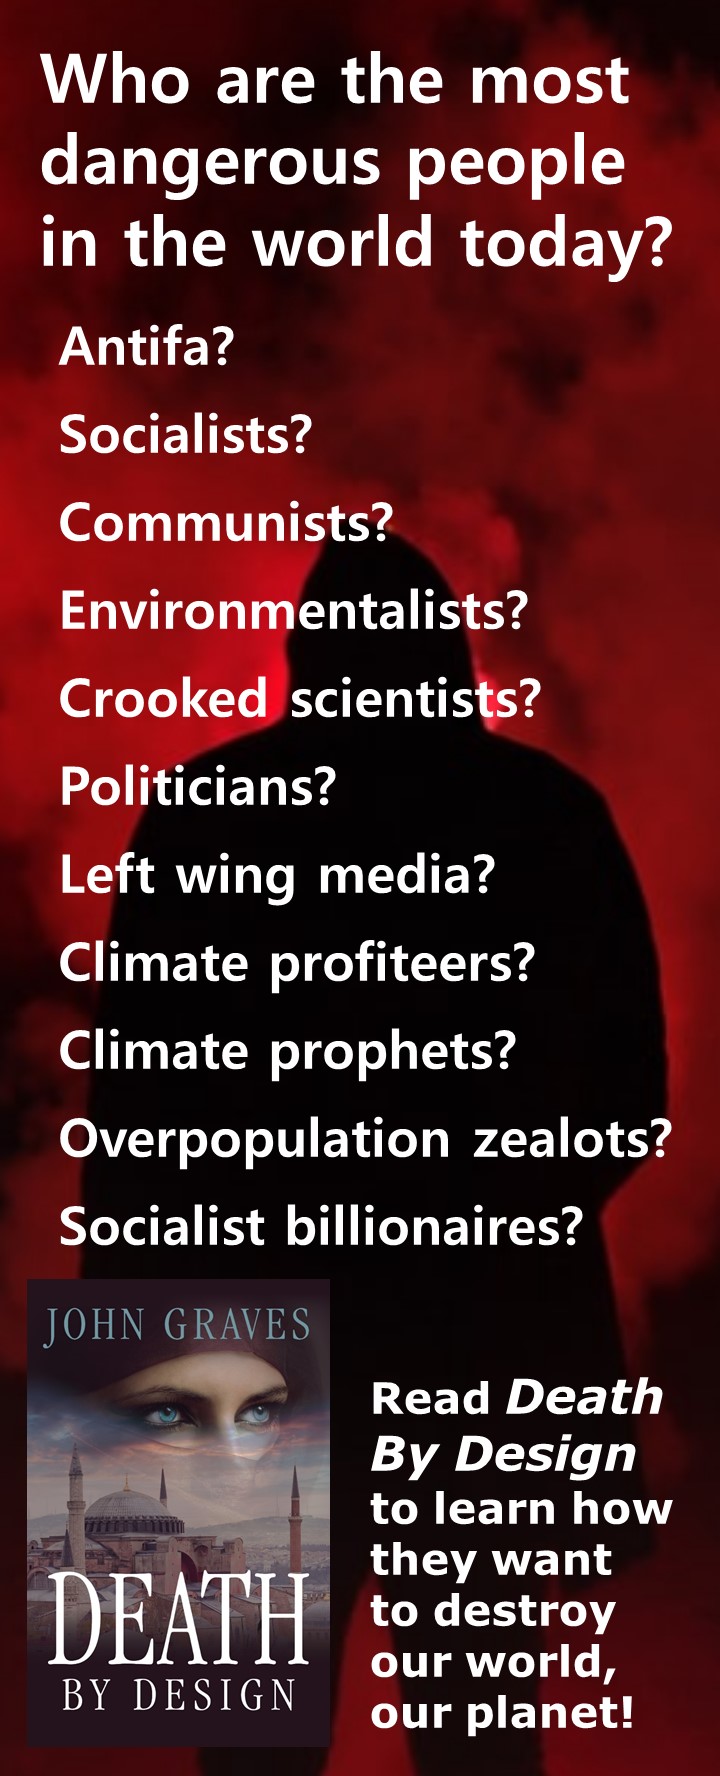 Who are the most dangerous people in the world today? Antifa? Socialists? Communists? Environmentalists? Crooked scientists? Politicians? Left wing media? Climate profiteers? Climate prophets? Overpopulation zealots? Socialist billionaires?